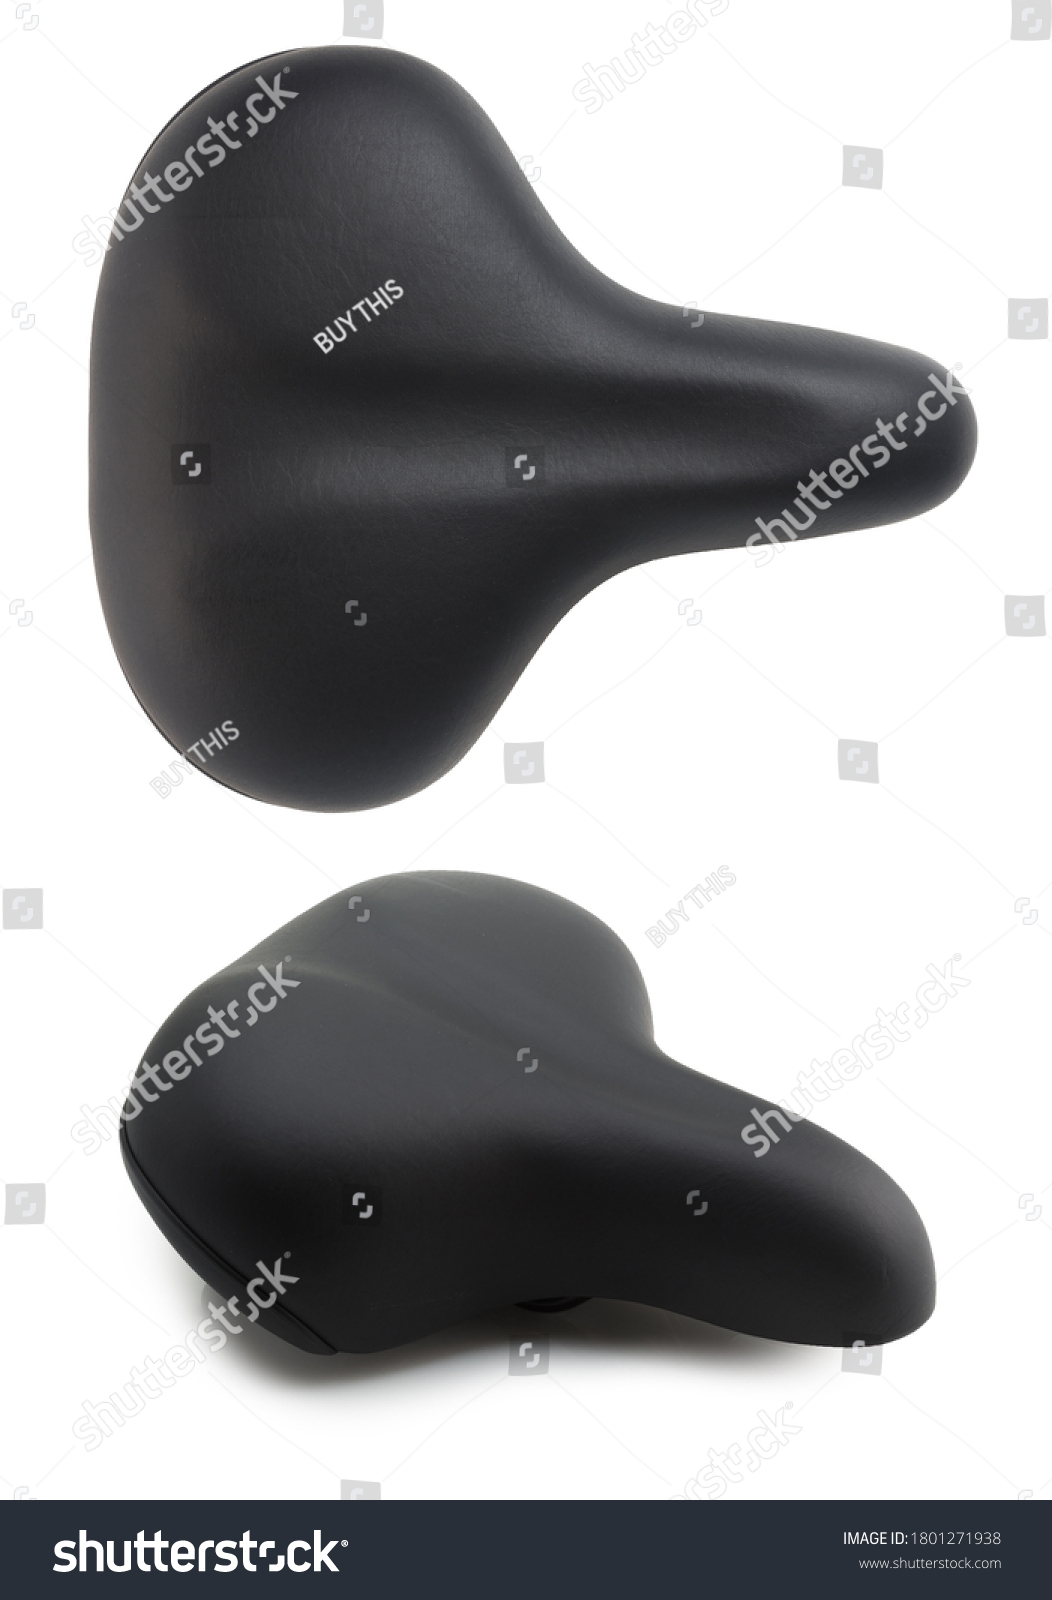 Bicycle seat in two angles. Top view and side view. Isolated on white background. #1801271938